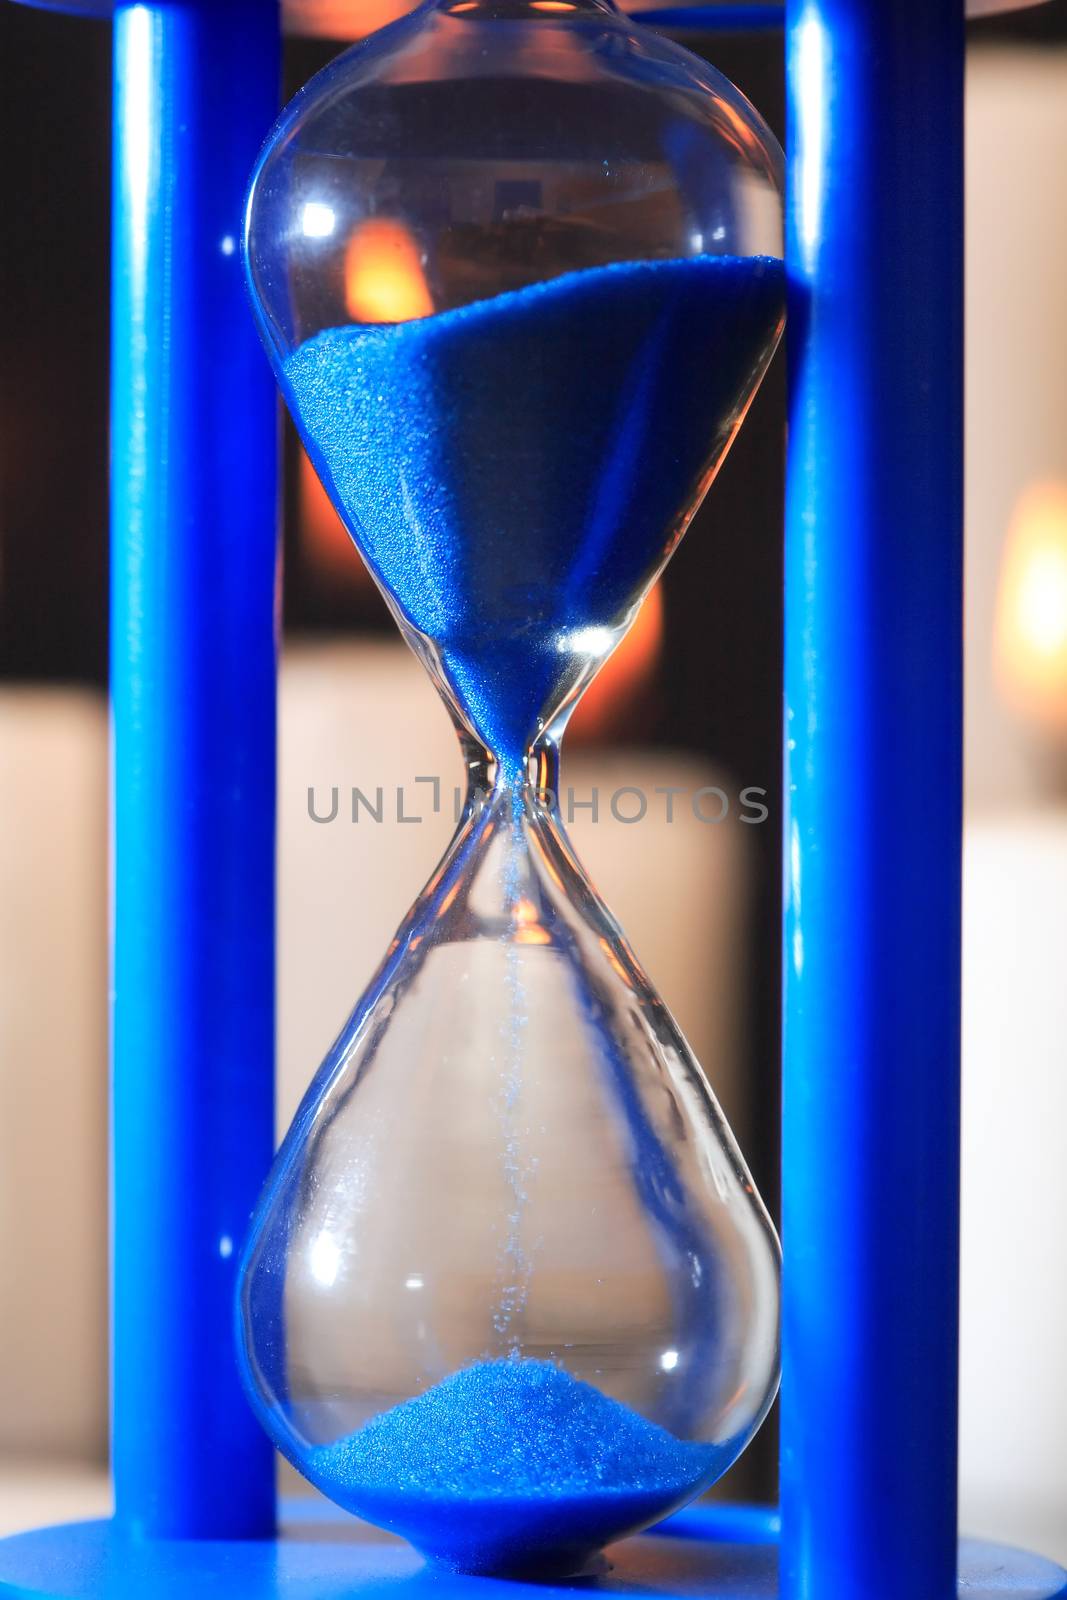 Extreme closeup of blue vintage hourglass with flowing sand